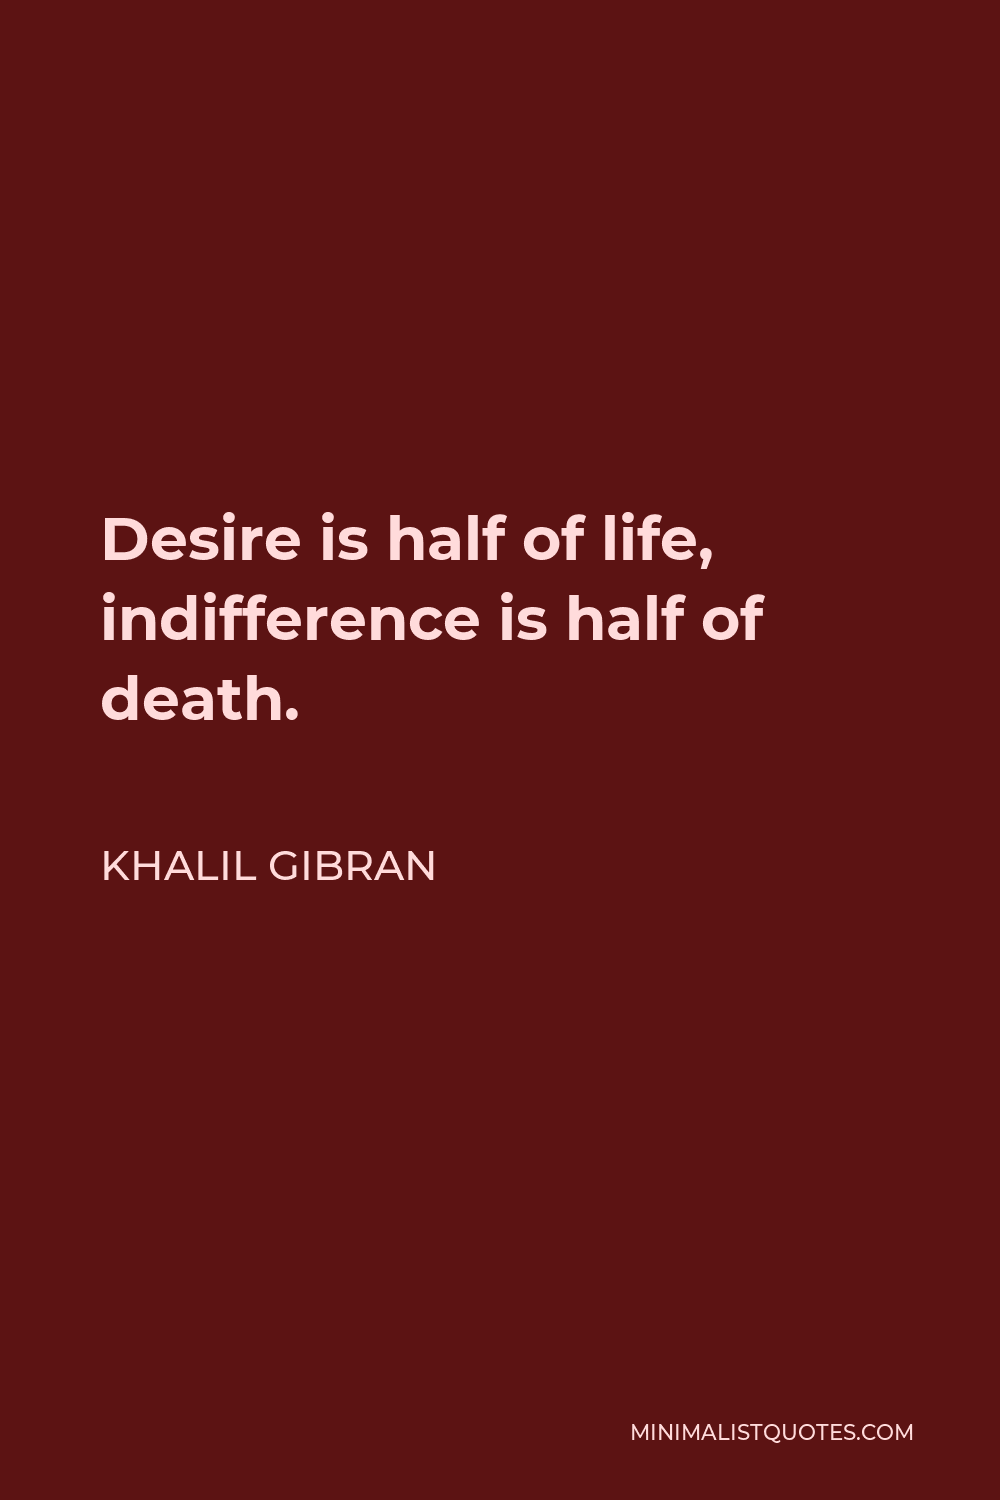 Khalil Gibran Quote - Desire is half of life, indifference is half of death.